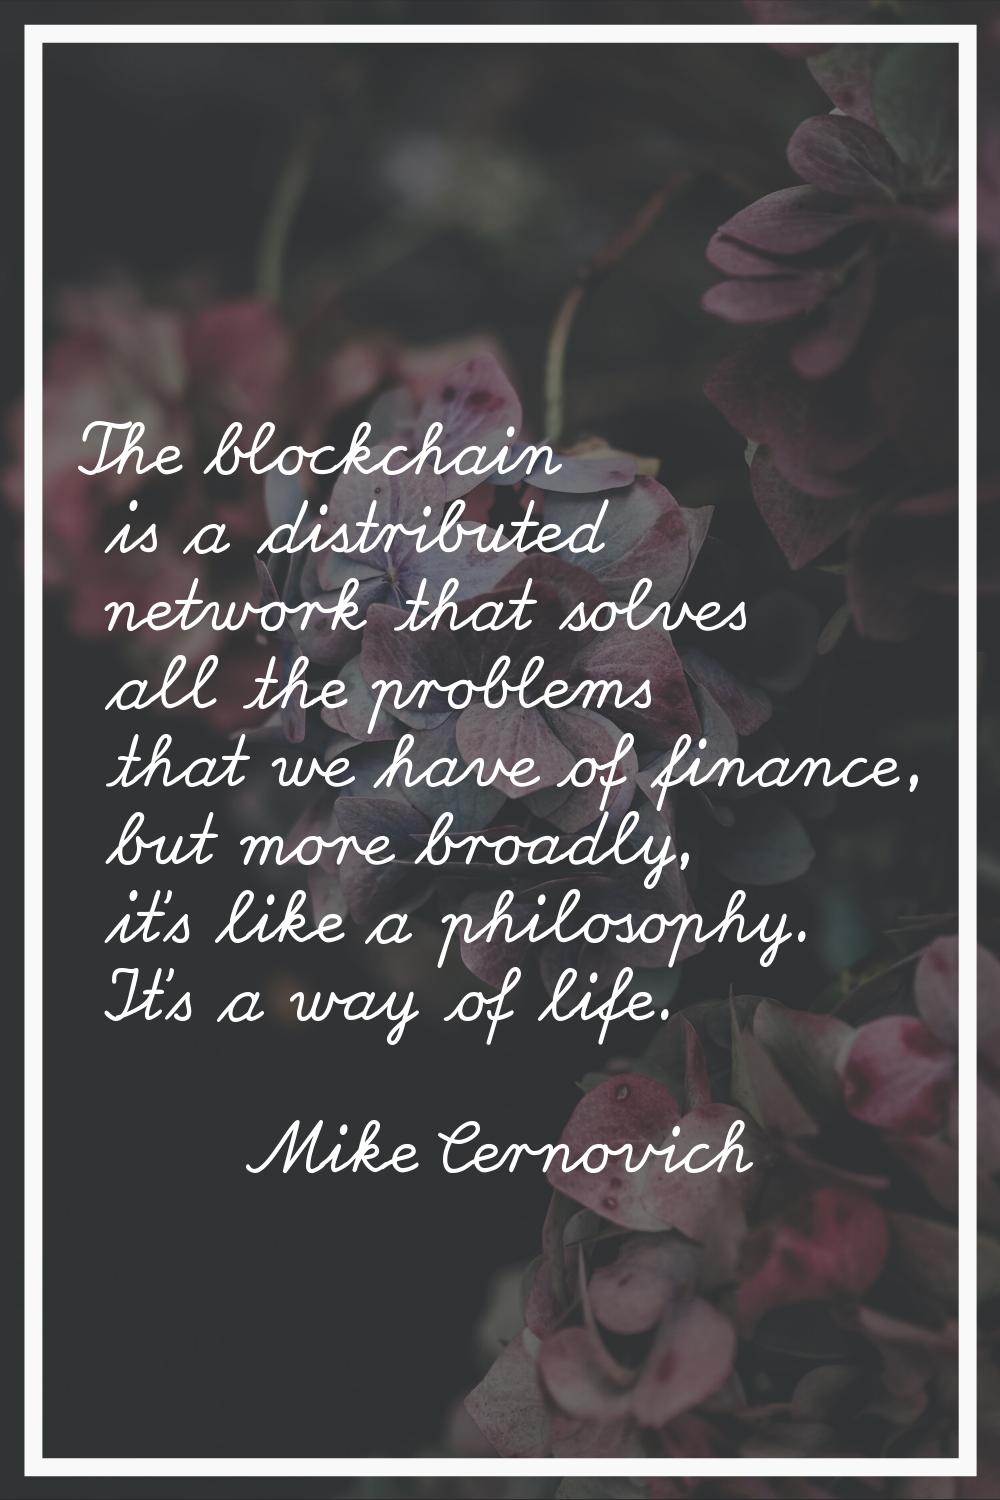 The blockchain is a distributed network that solves all the problems that we have of finance, but m